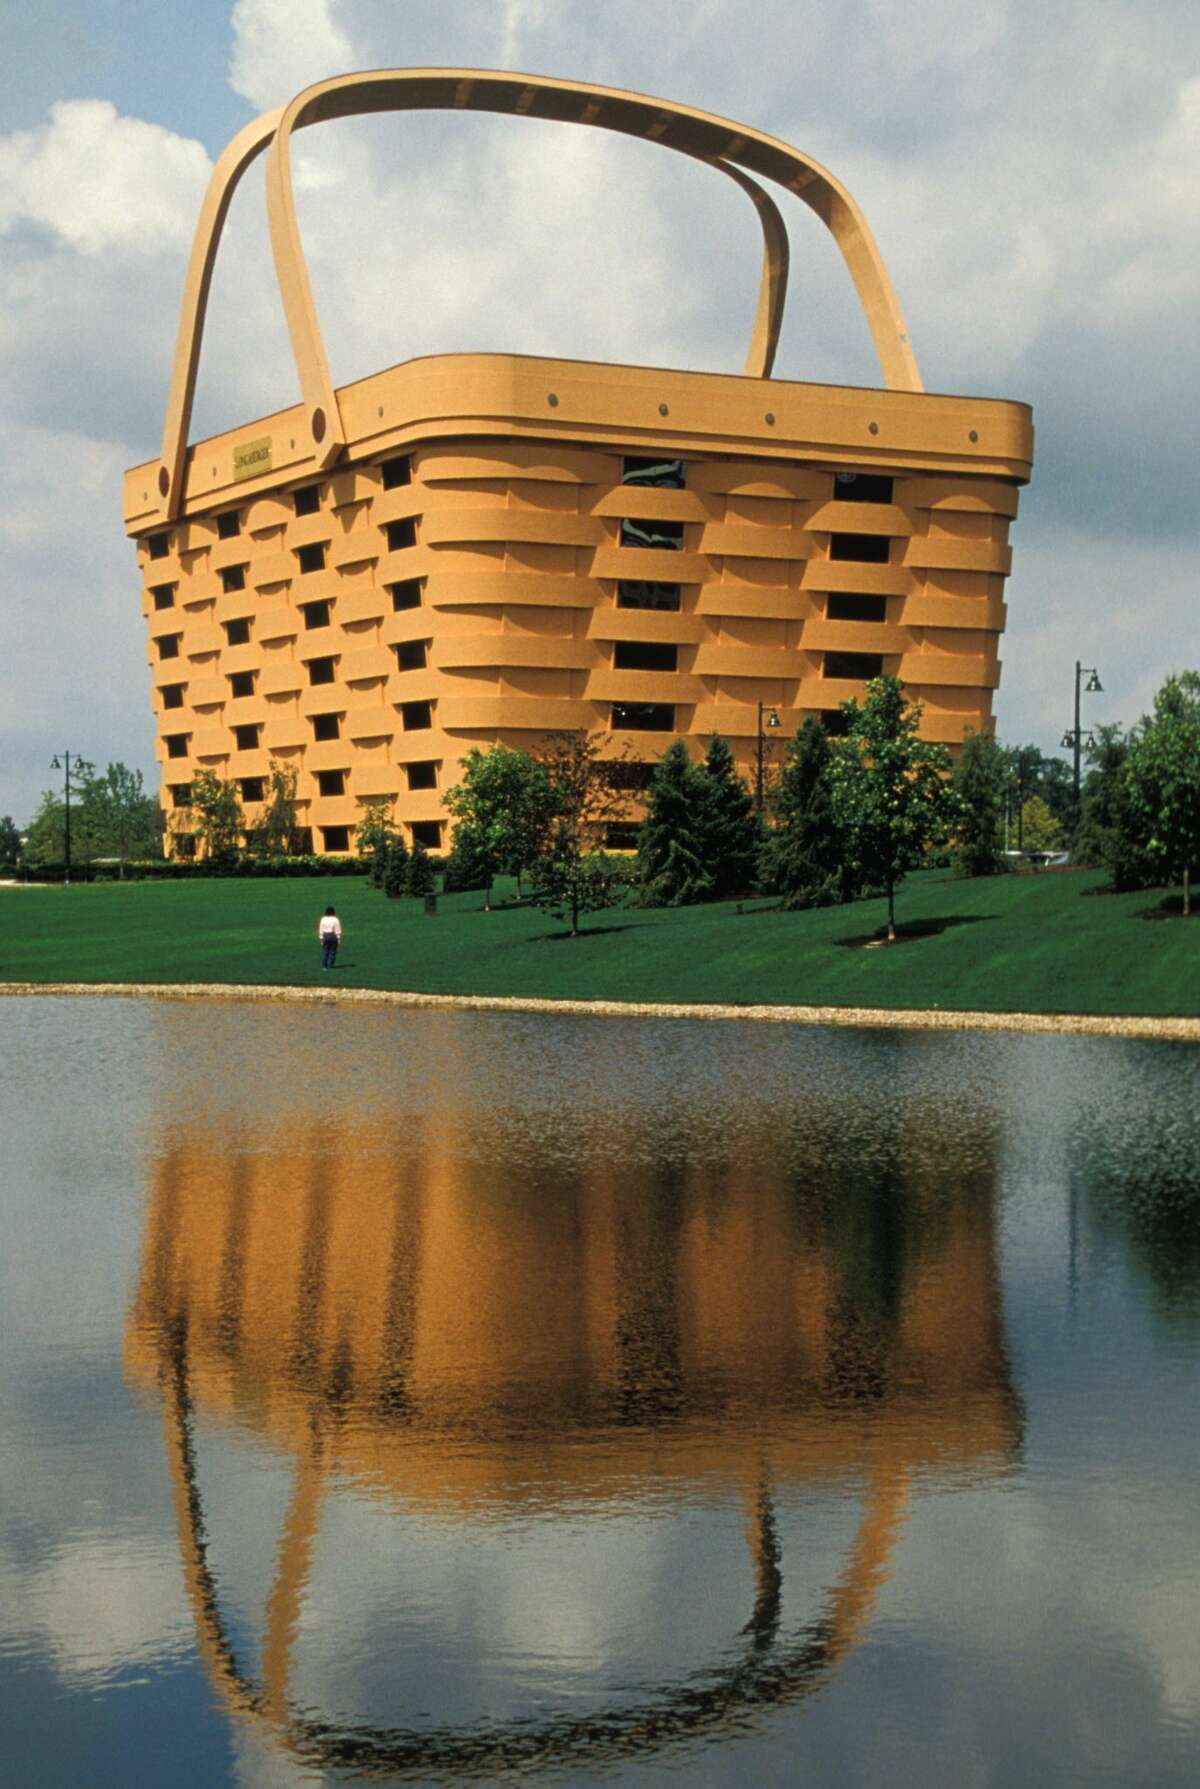 Here's another view of the seven-story headquarters of the Longaberger Company in Newark, Ohio. (Photo by: Jeff Greenberg/UIG via Getty Images)